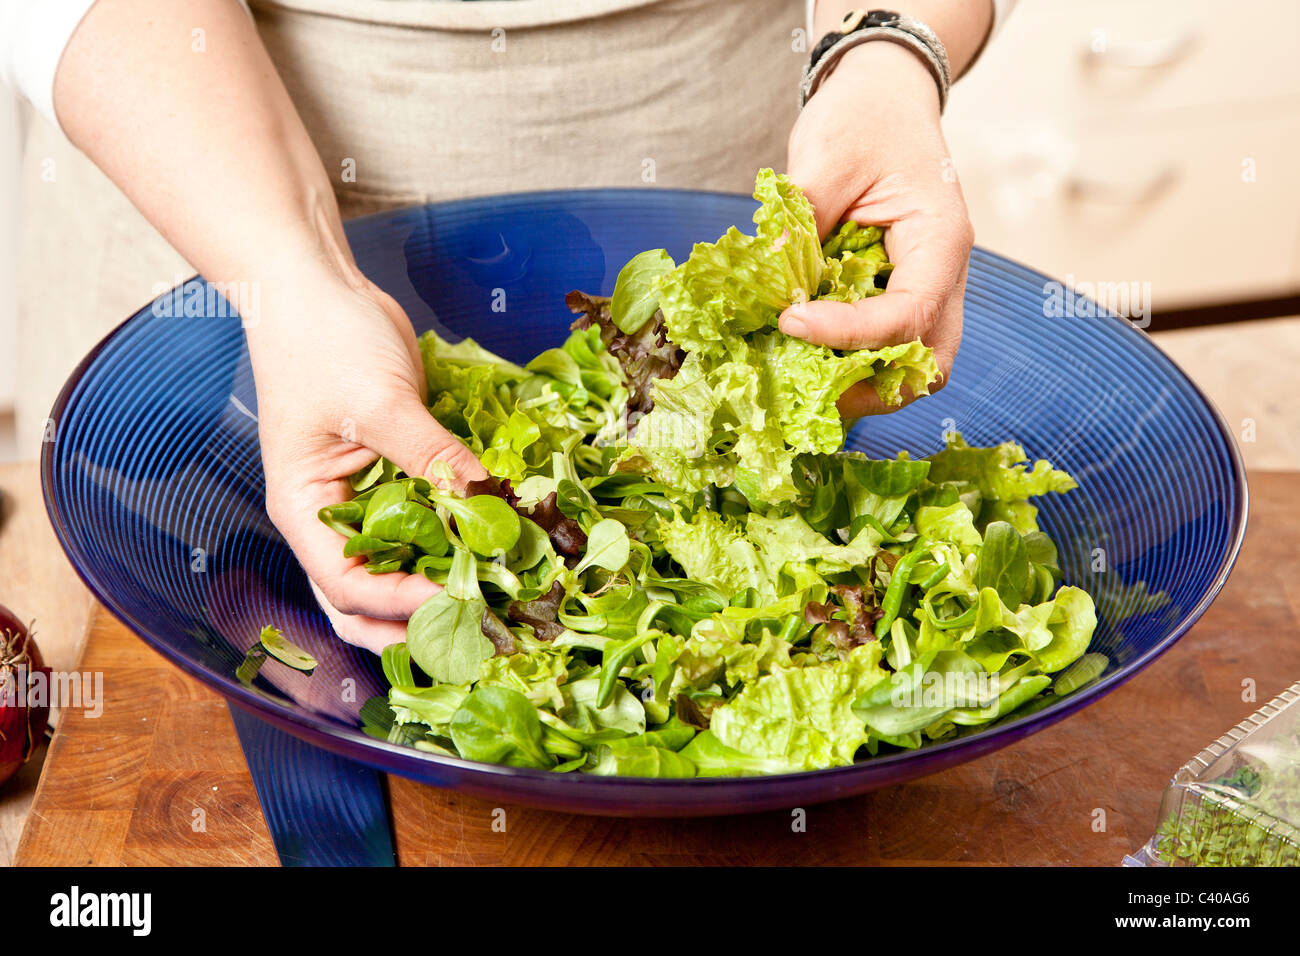 Chef mixing a salad of various sorts of lettuce in a blue bowl Stock Photo